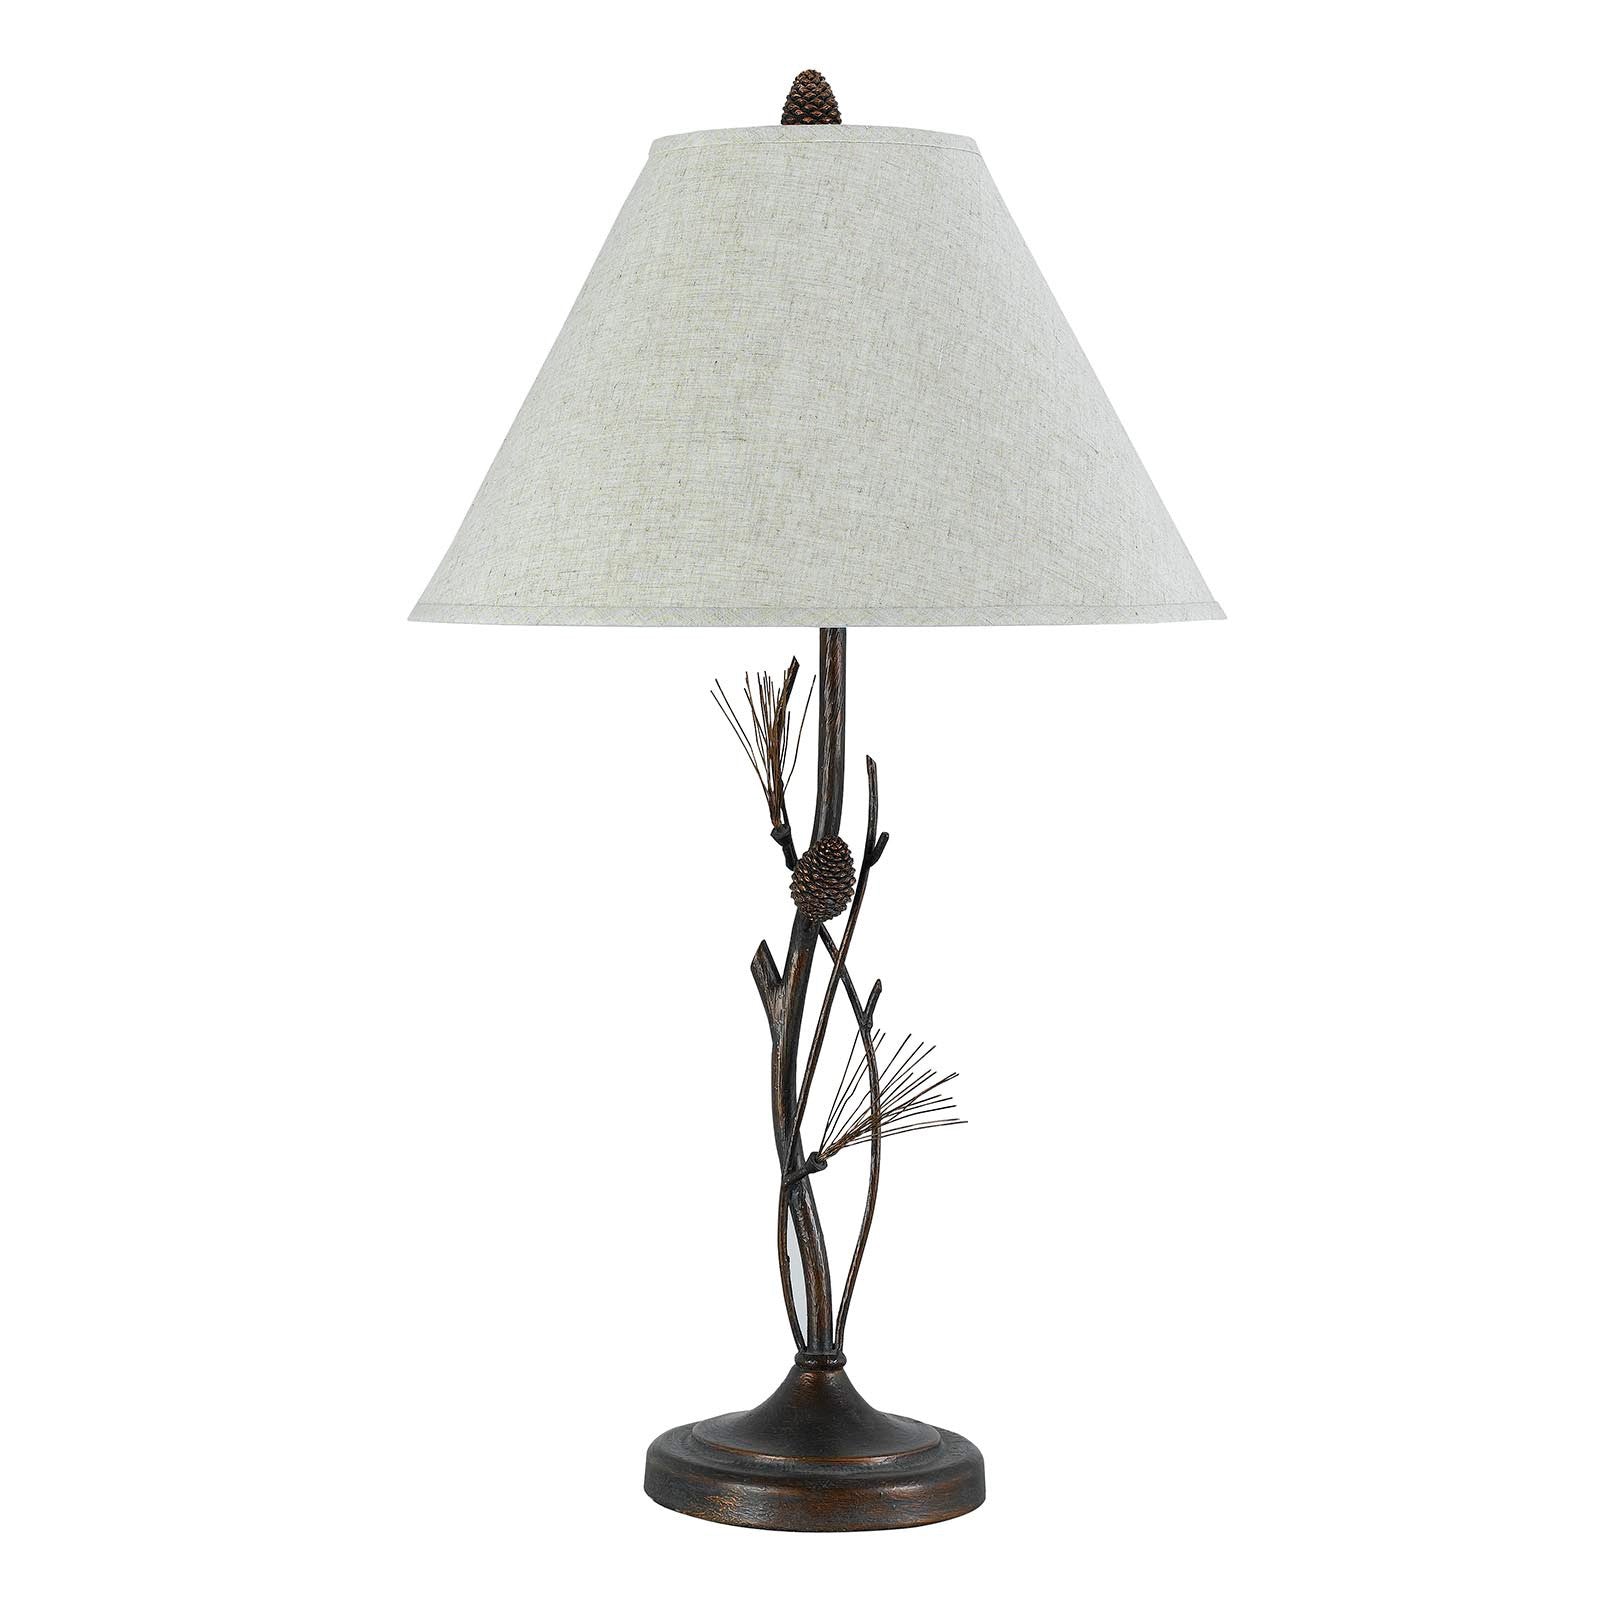 32" Rust Metal Table Lamp With Gray Empire Shade